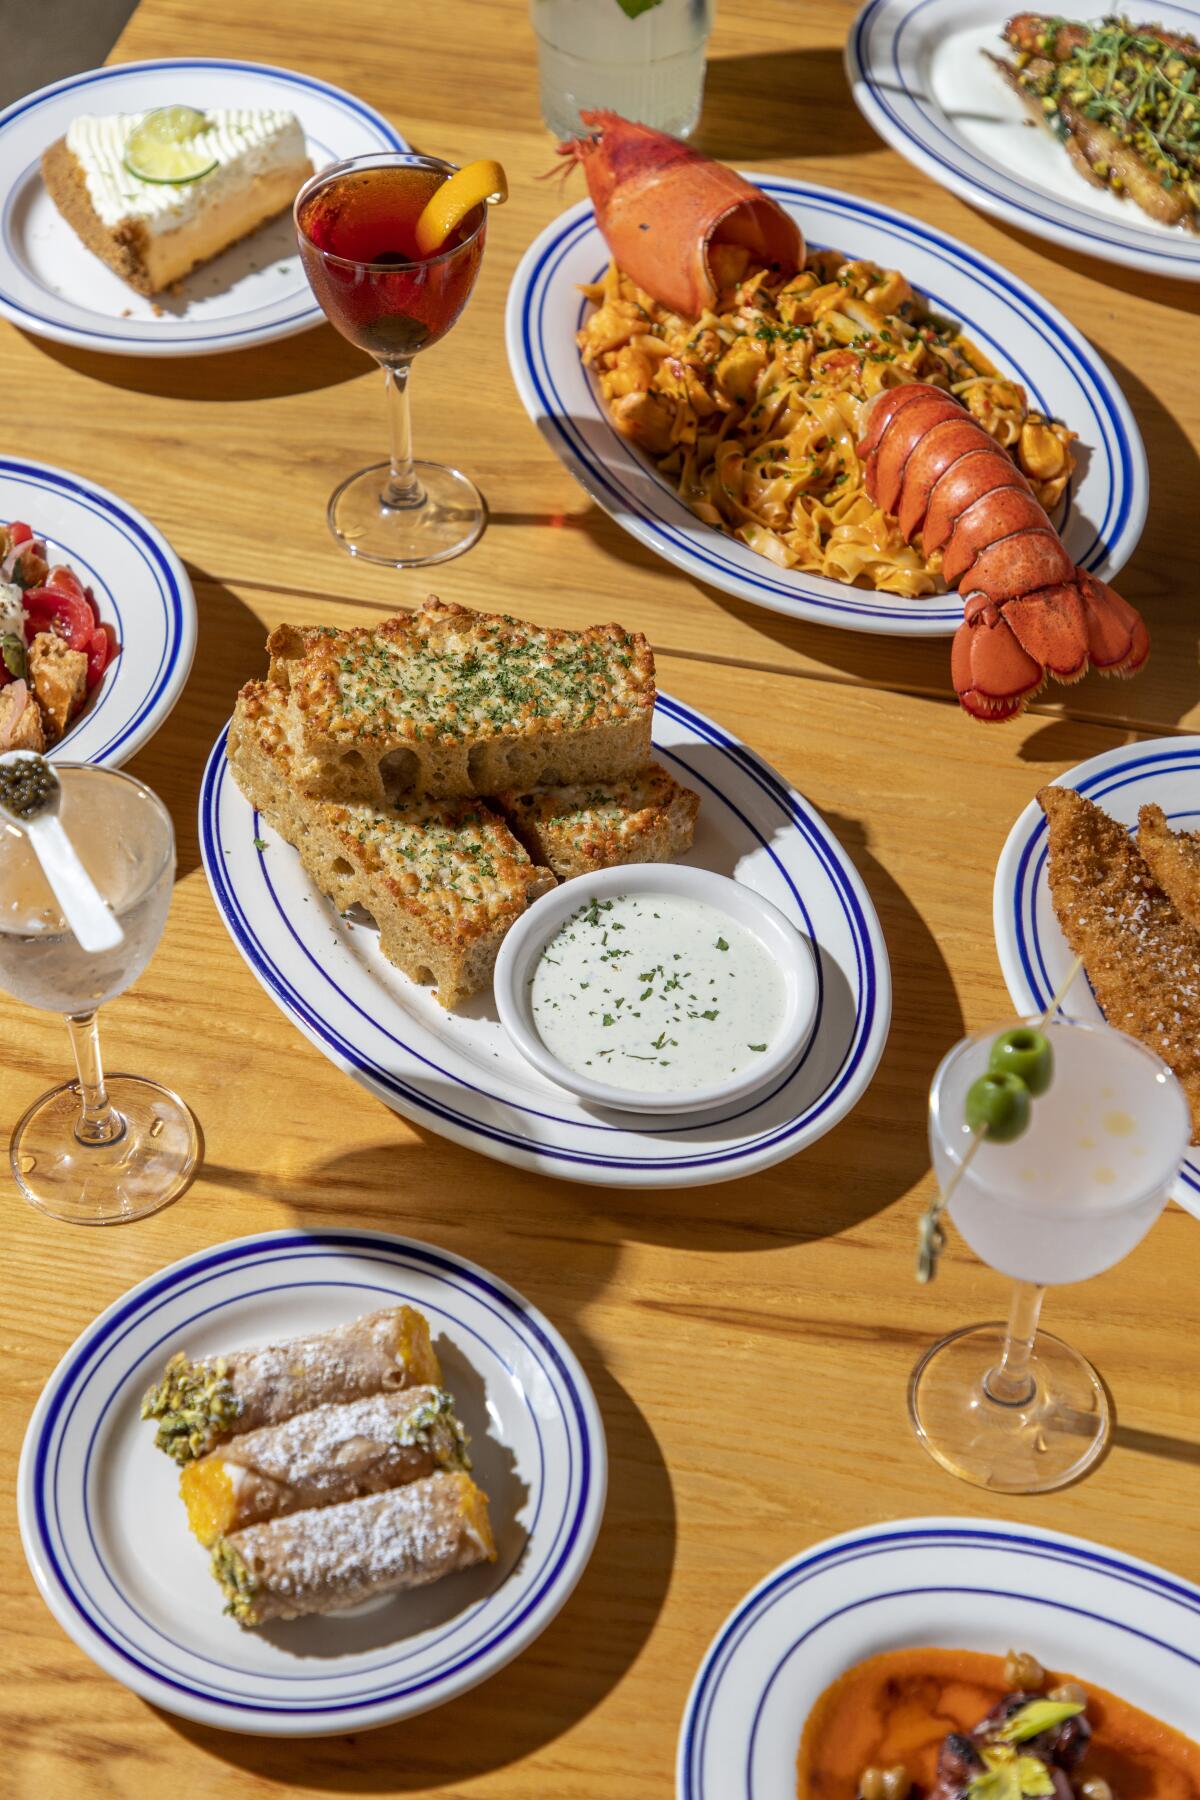 A table with dishes including calamari, martinis and other Italian American fare from Jemma di Mare Brentwood.